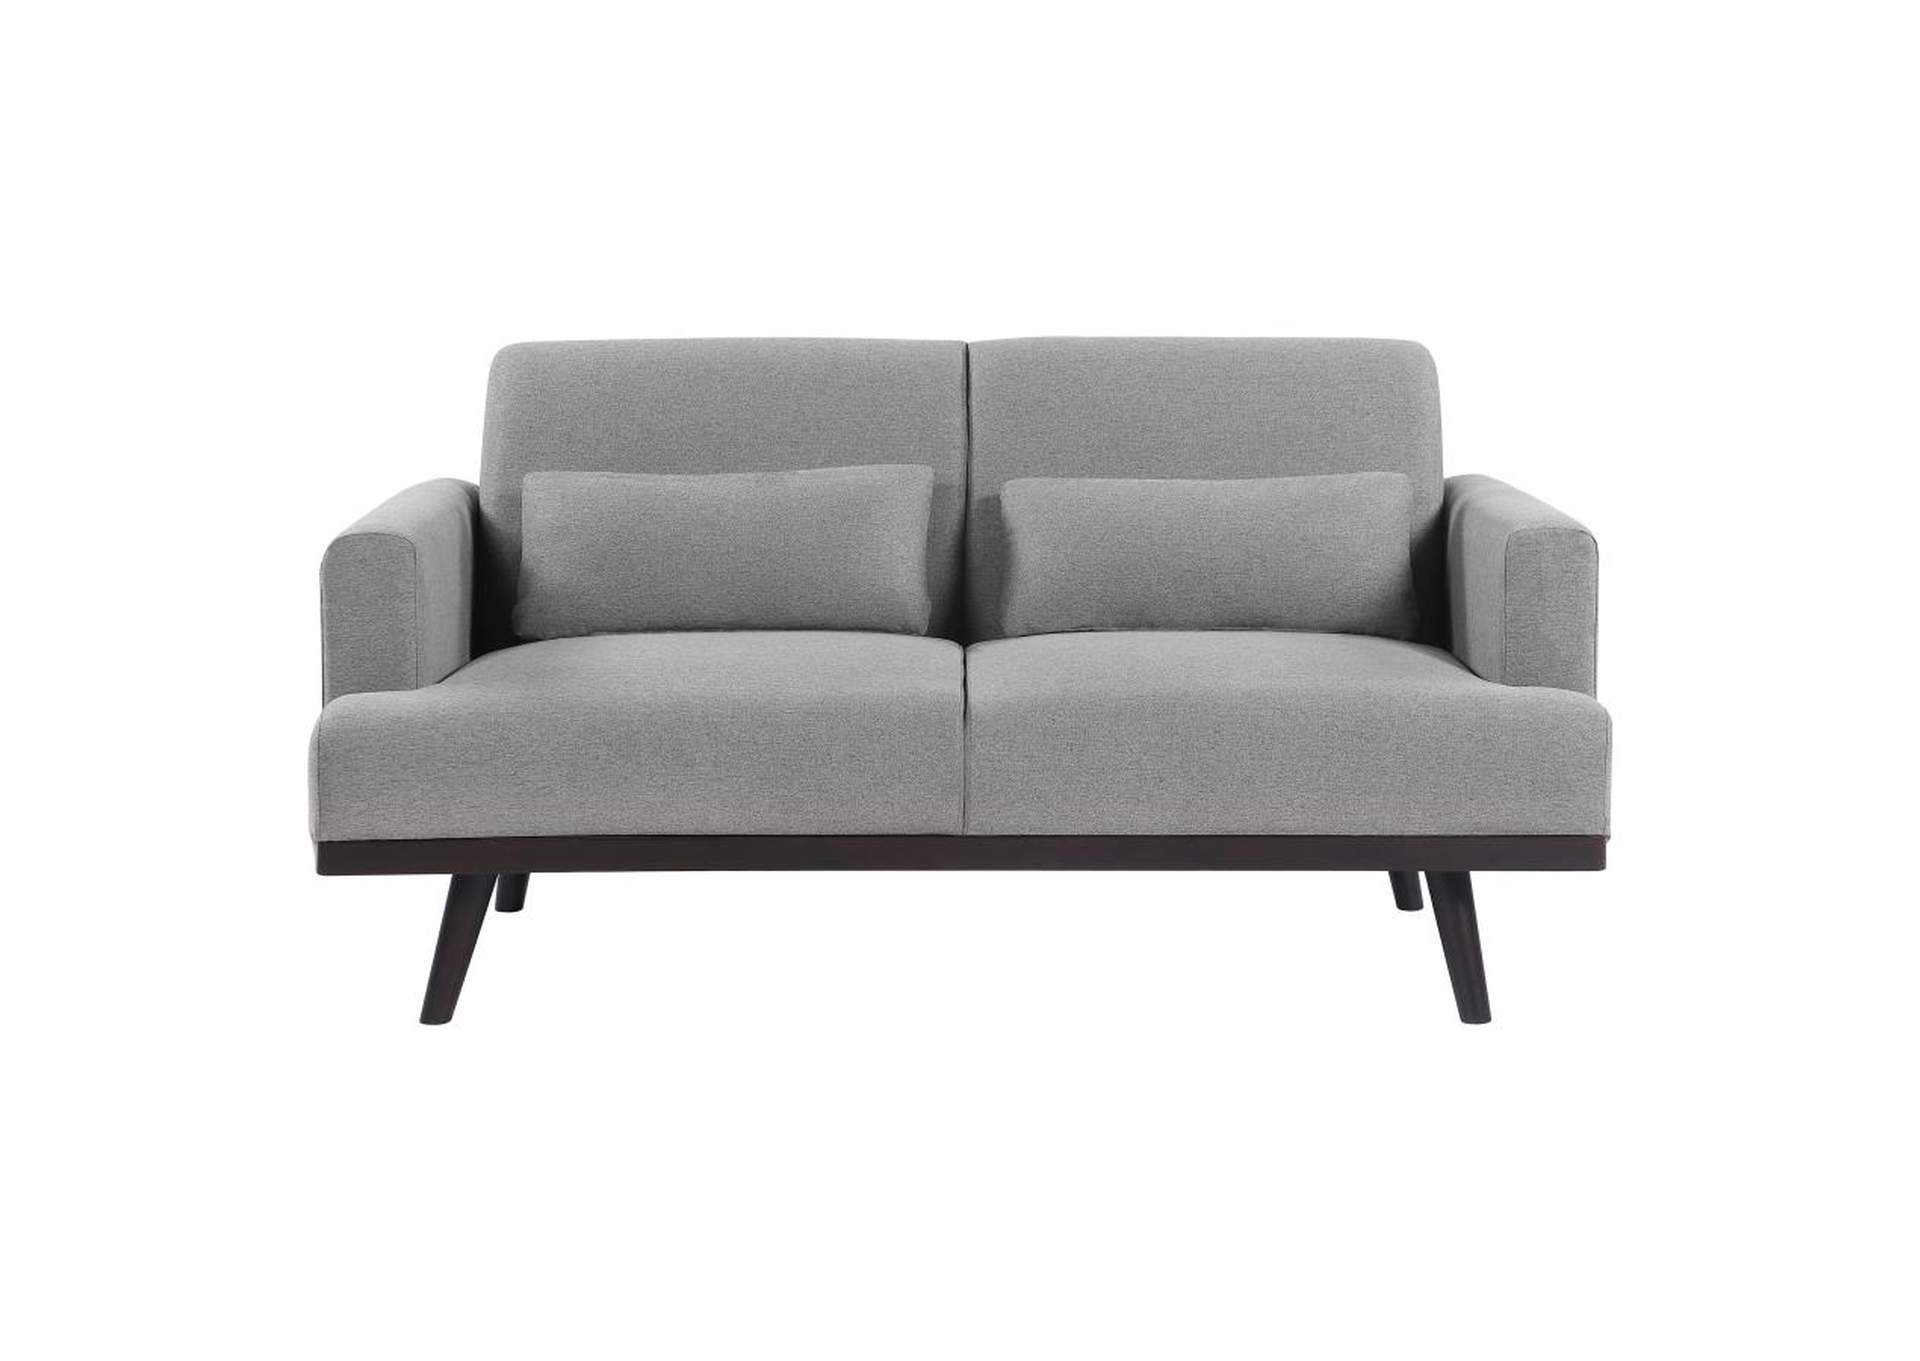 Blake Upholstered Loveseat with Track Arms Sharkskin and Dark Brown,Coaster Furniture